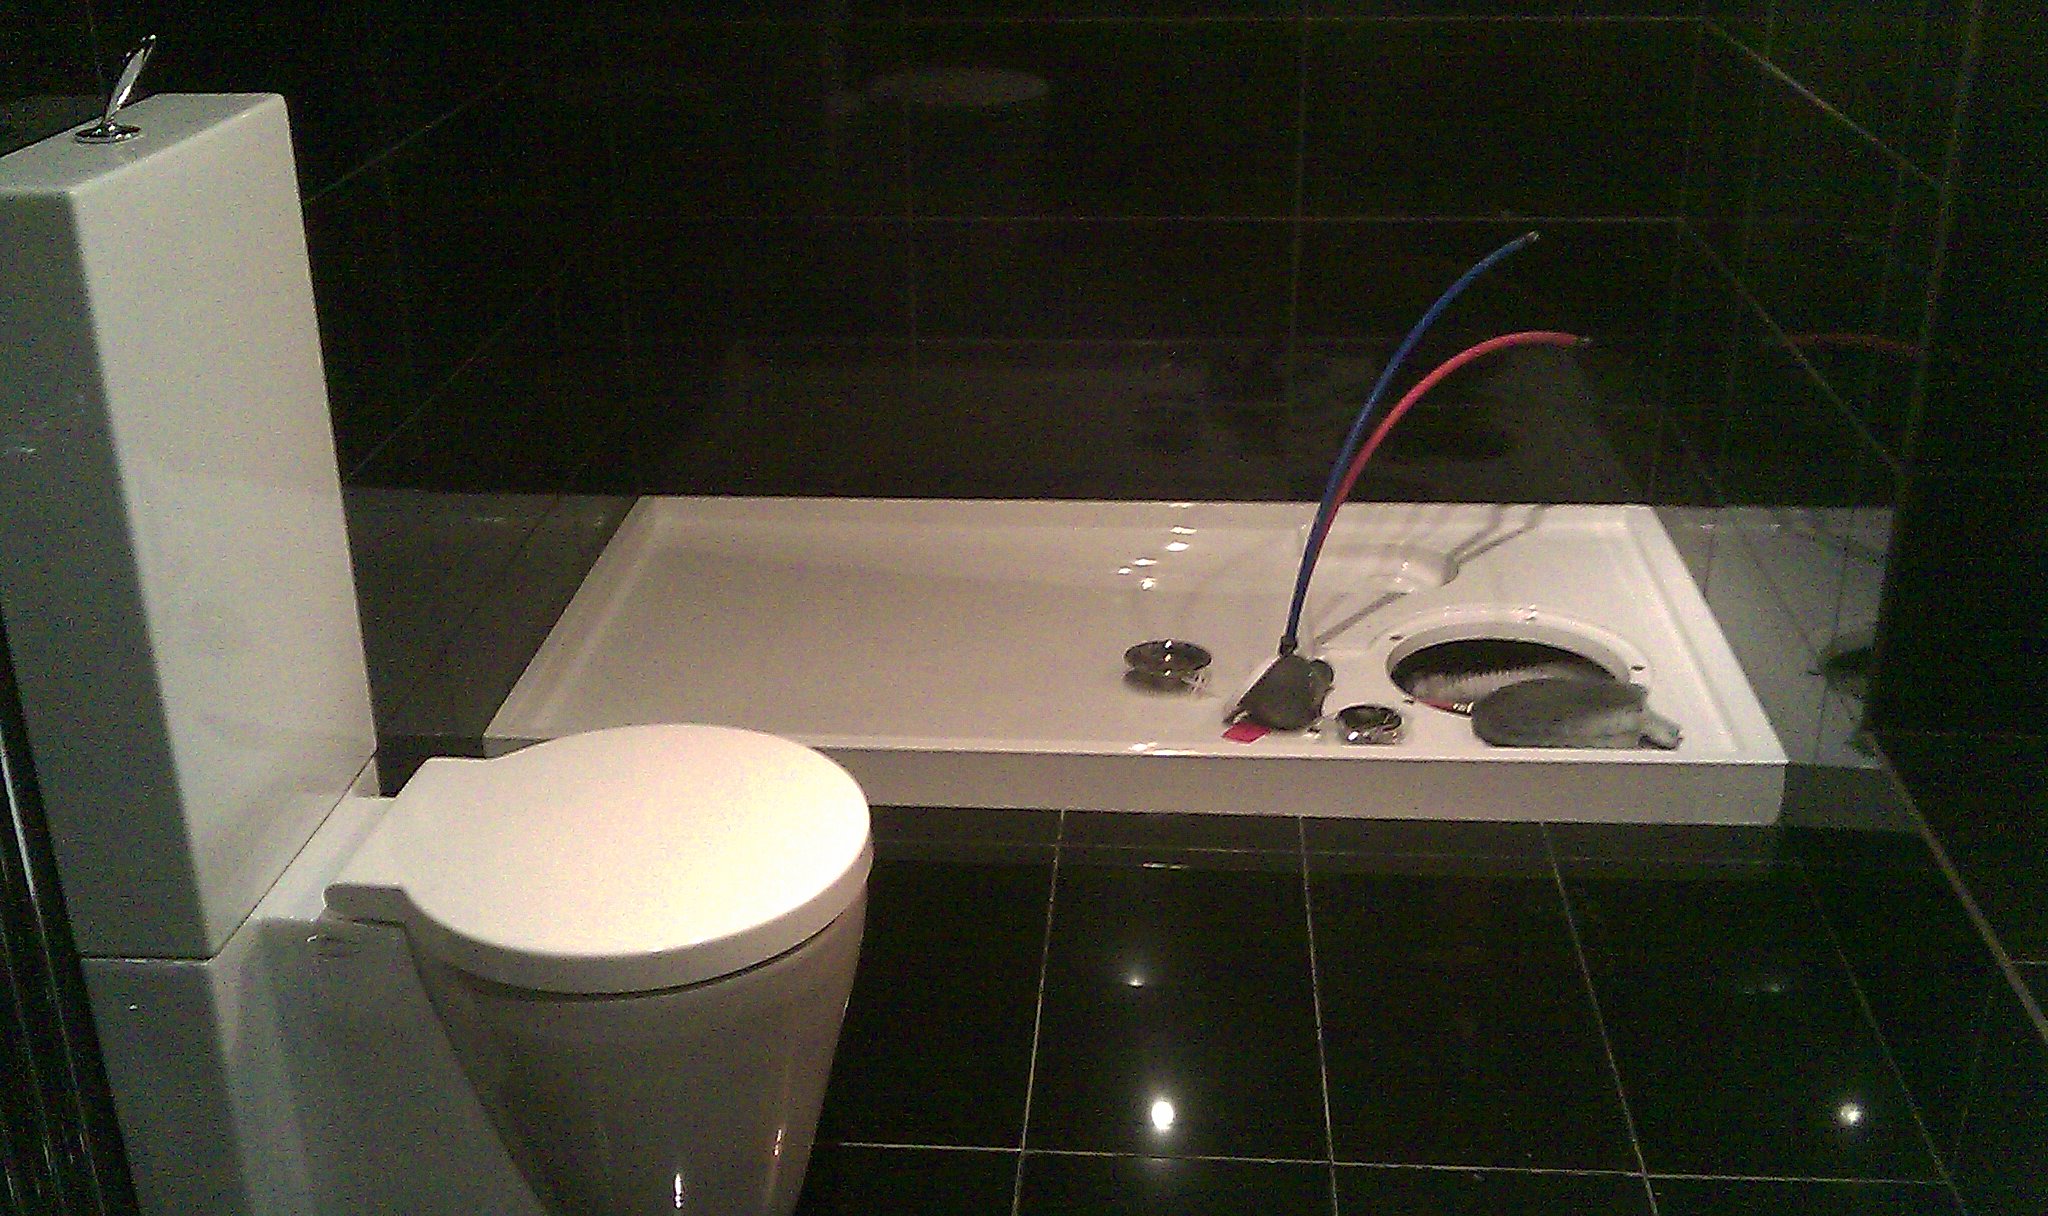 Shower tray with hot & cold feeds.